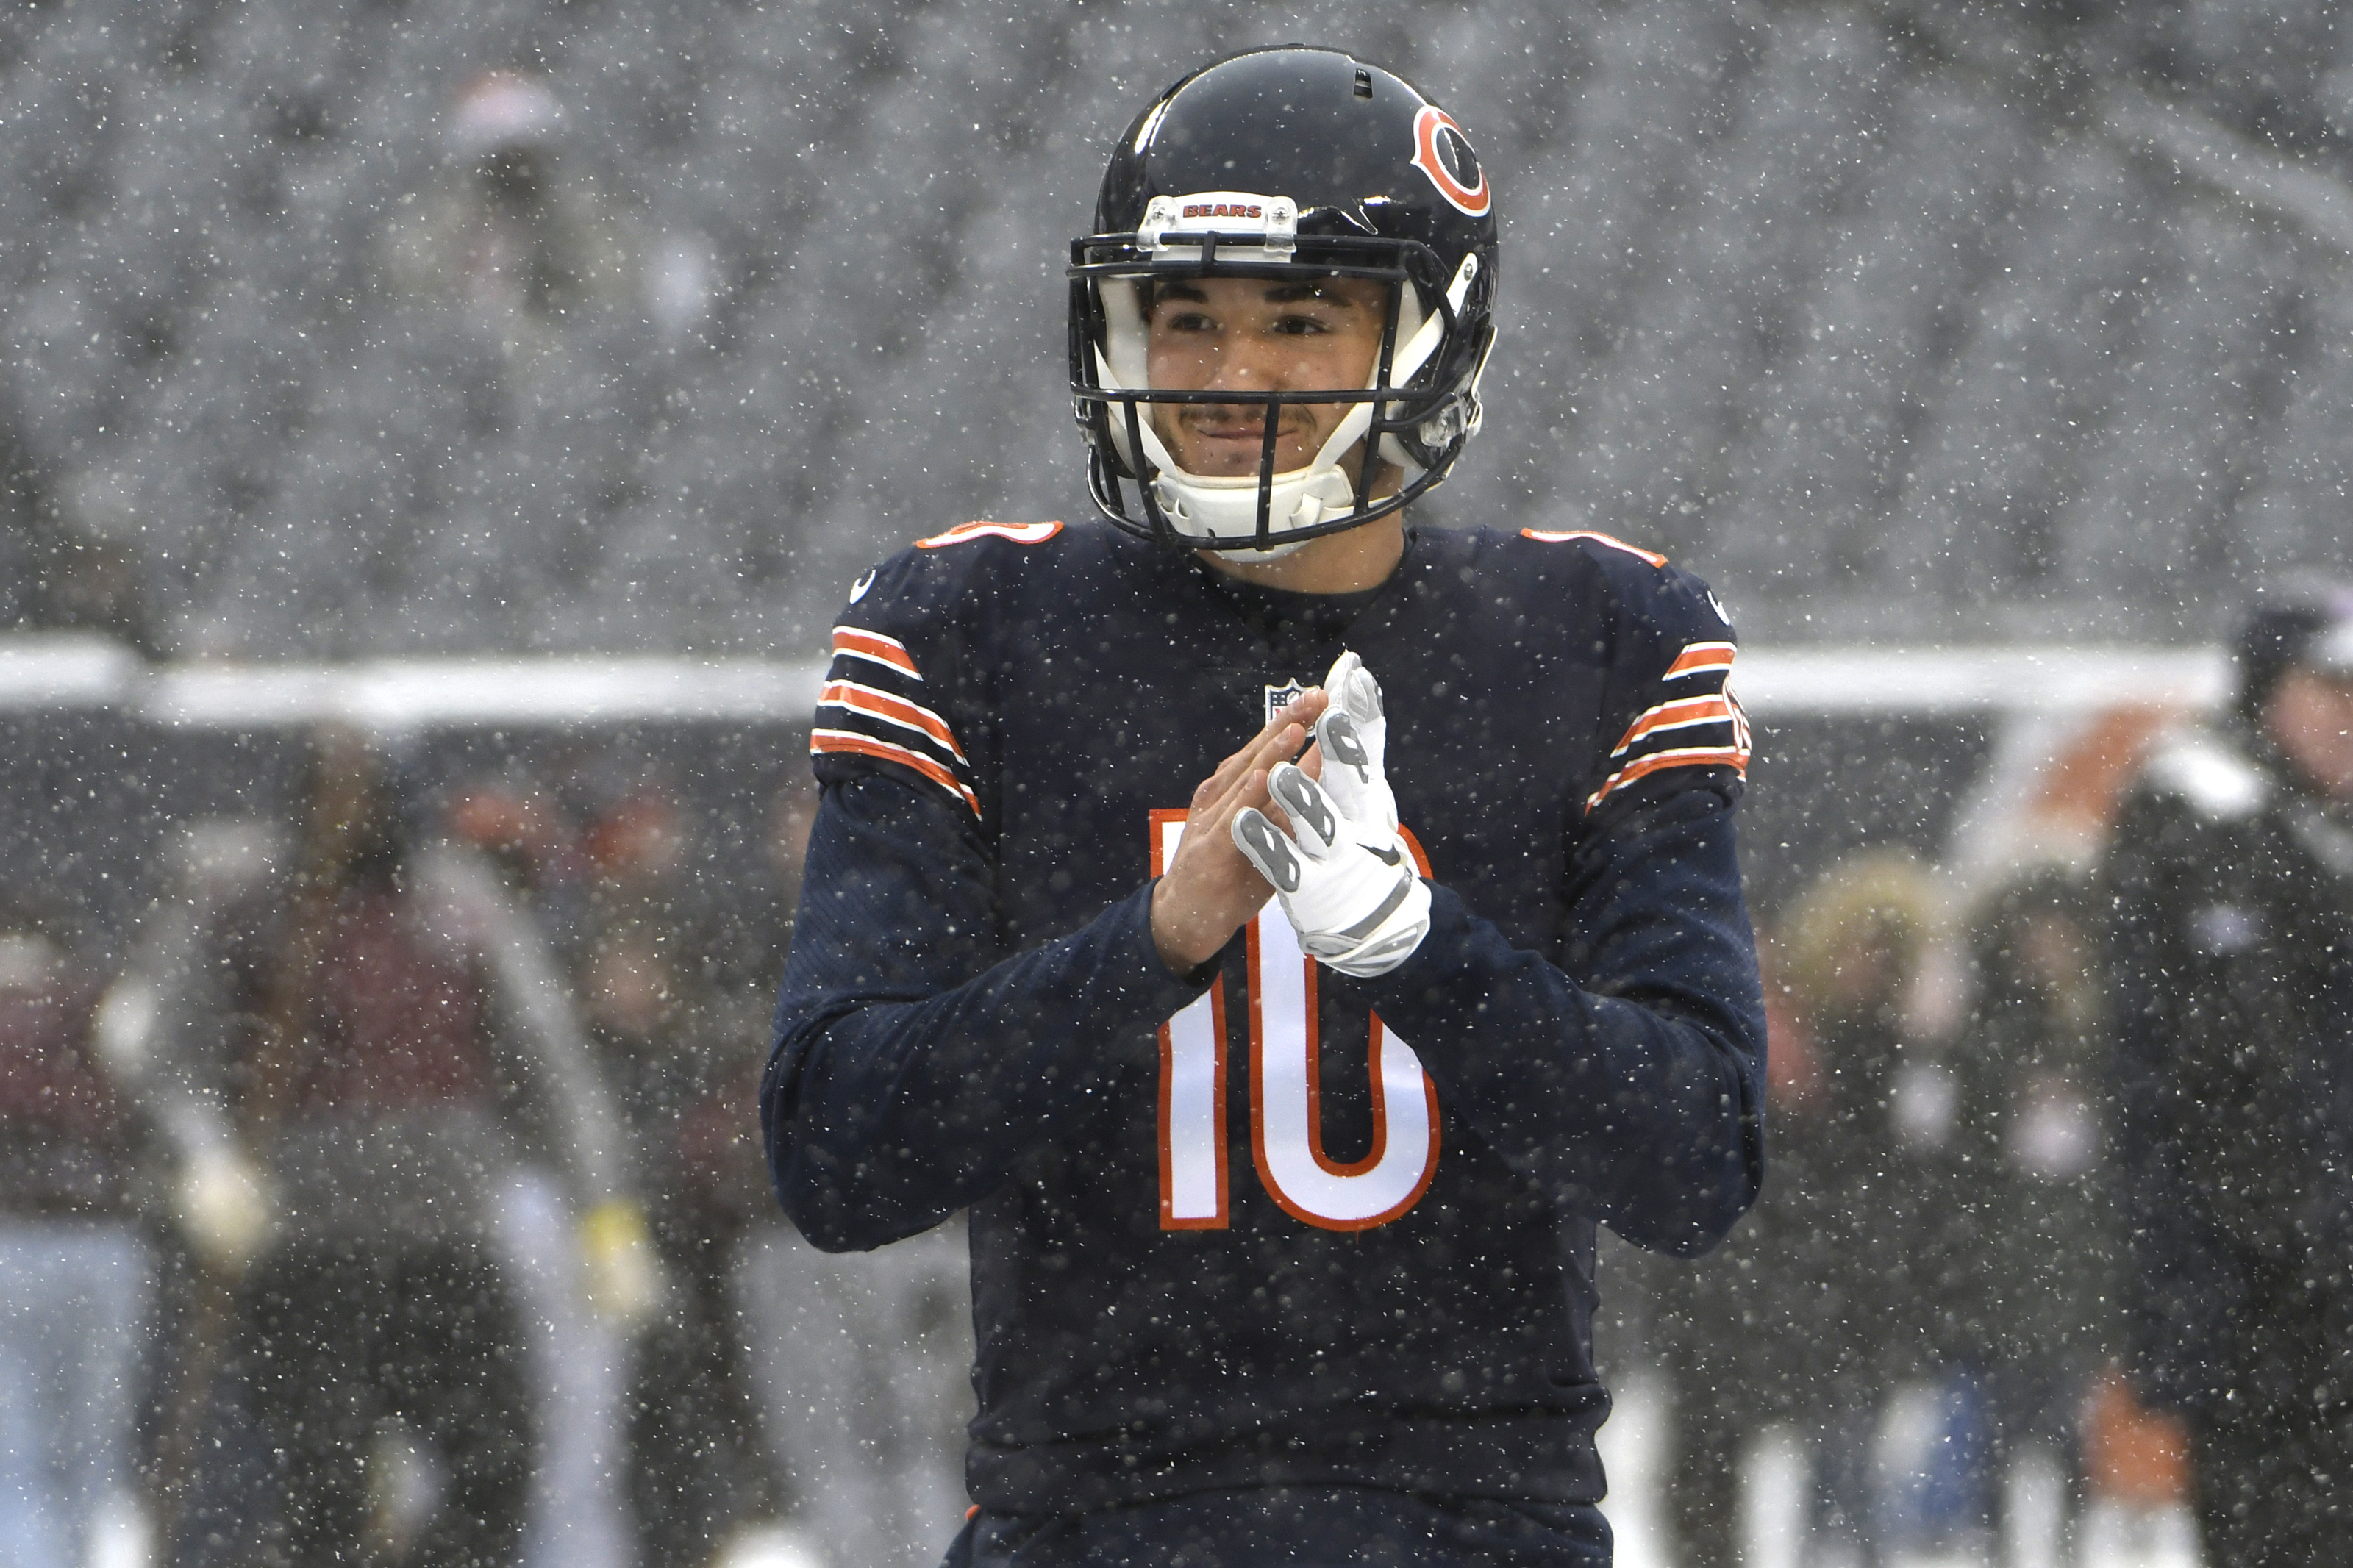 Chicago Bears: Much pressure on shoulders of Mitchell Trubisky